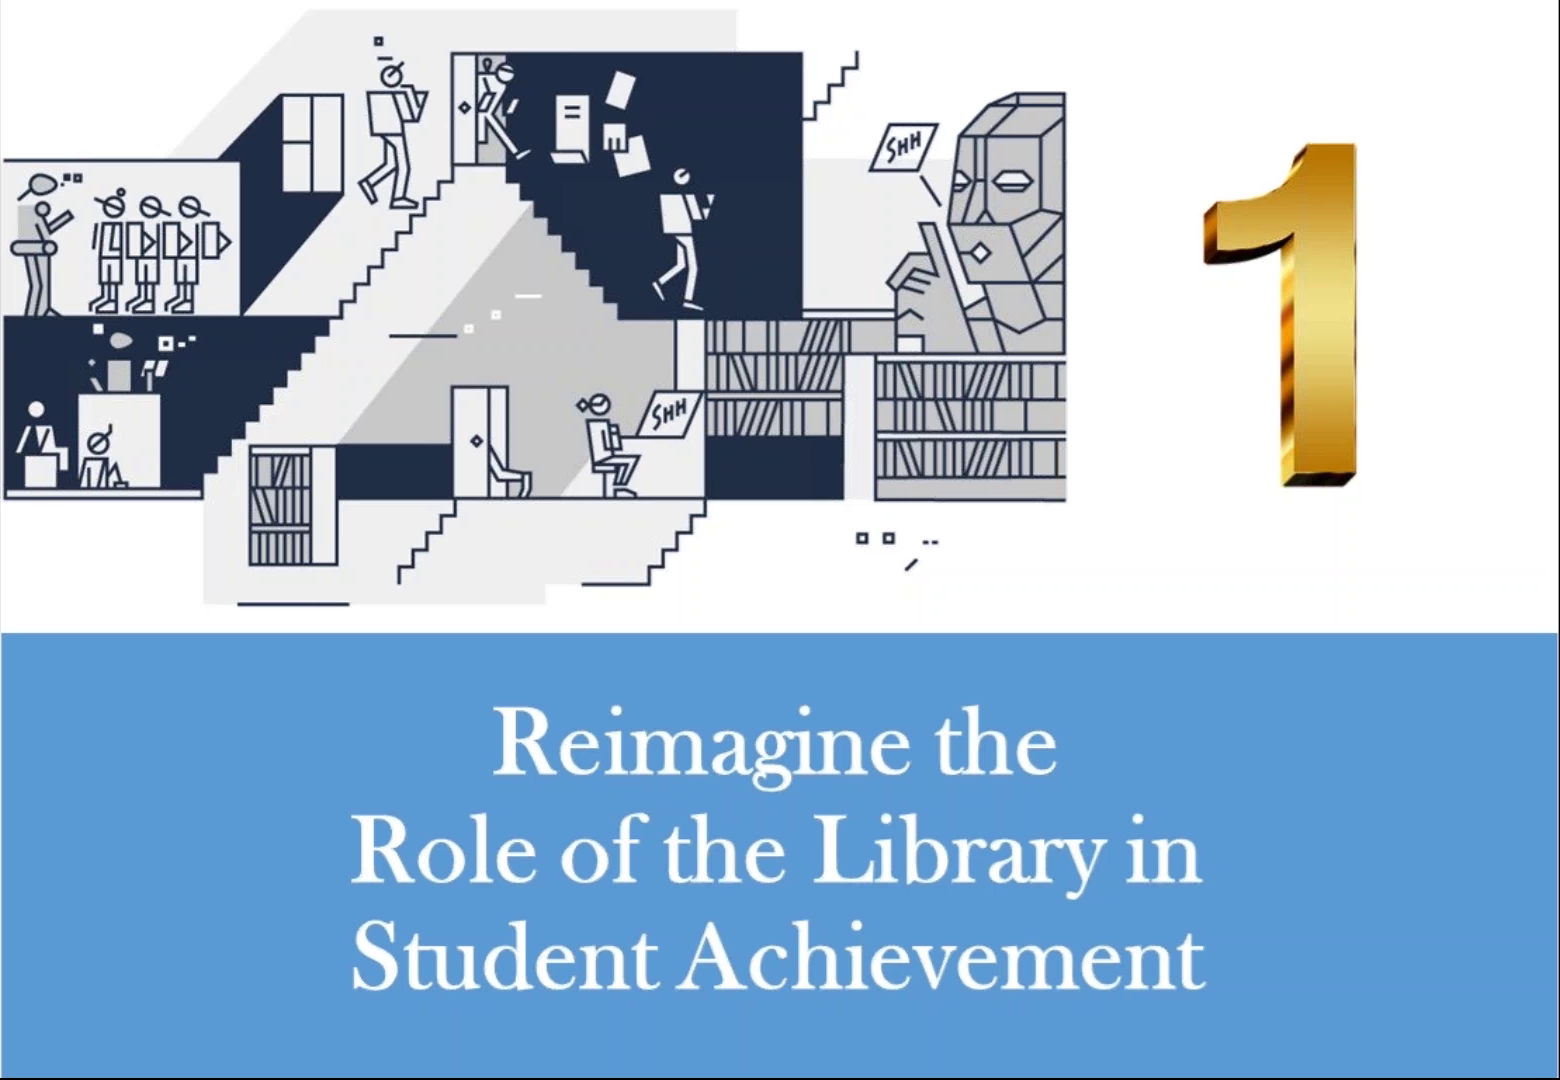 How to reimagine the role of the library in student achievement